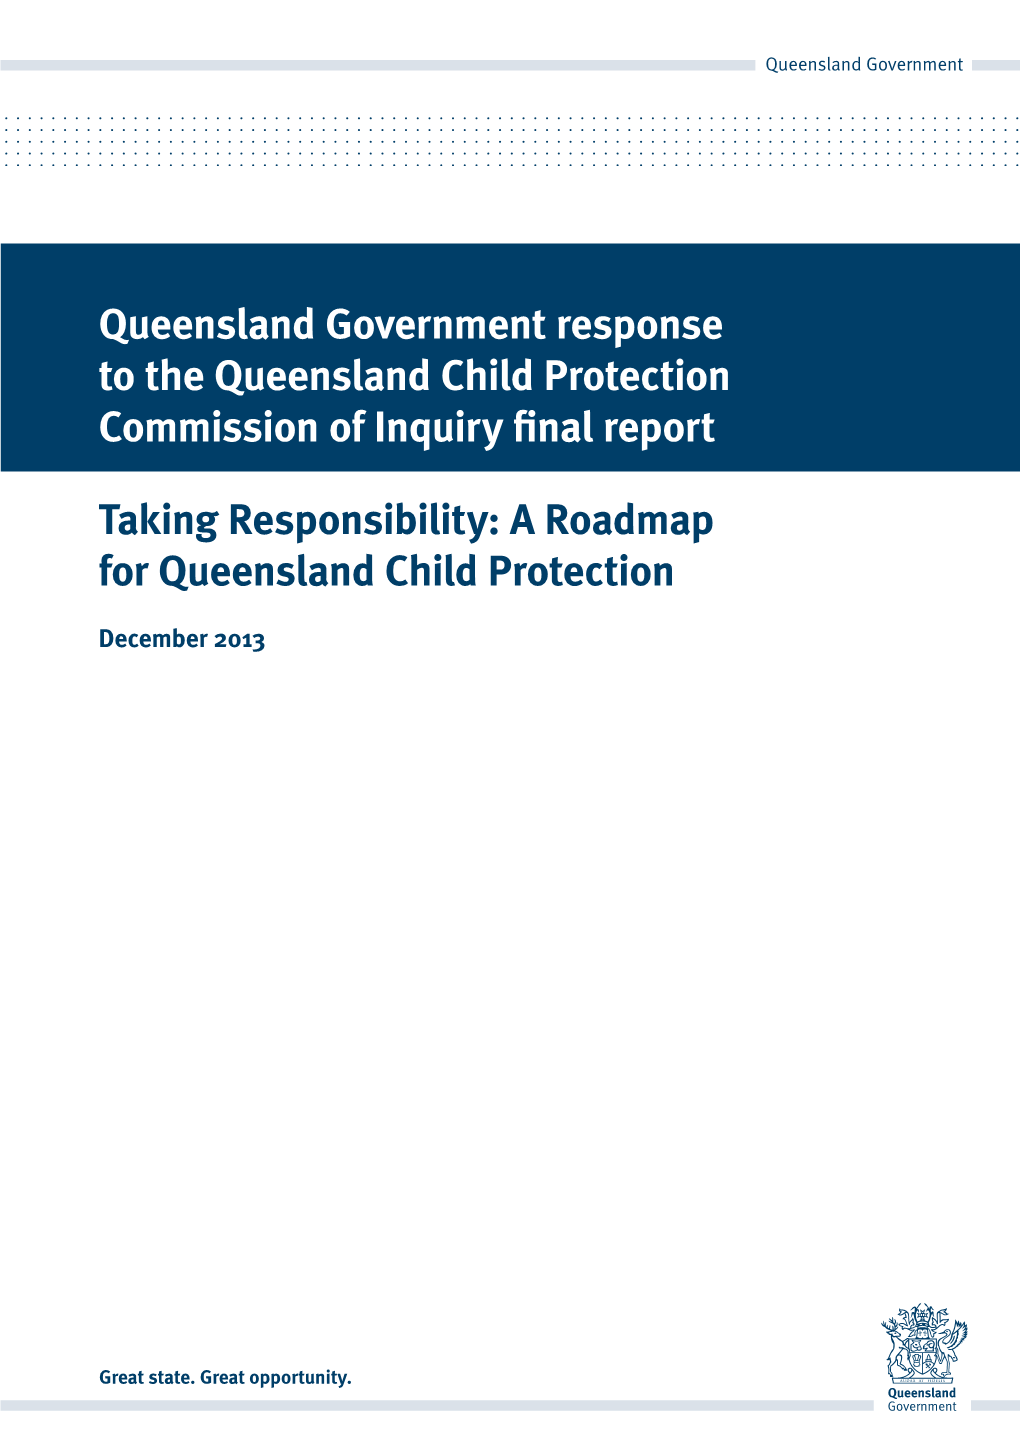 Taking Responsibility: a Roadmap for Queensland Child Protection